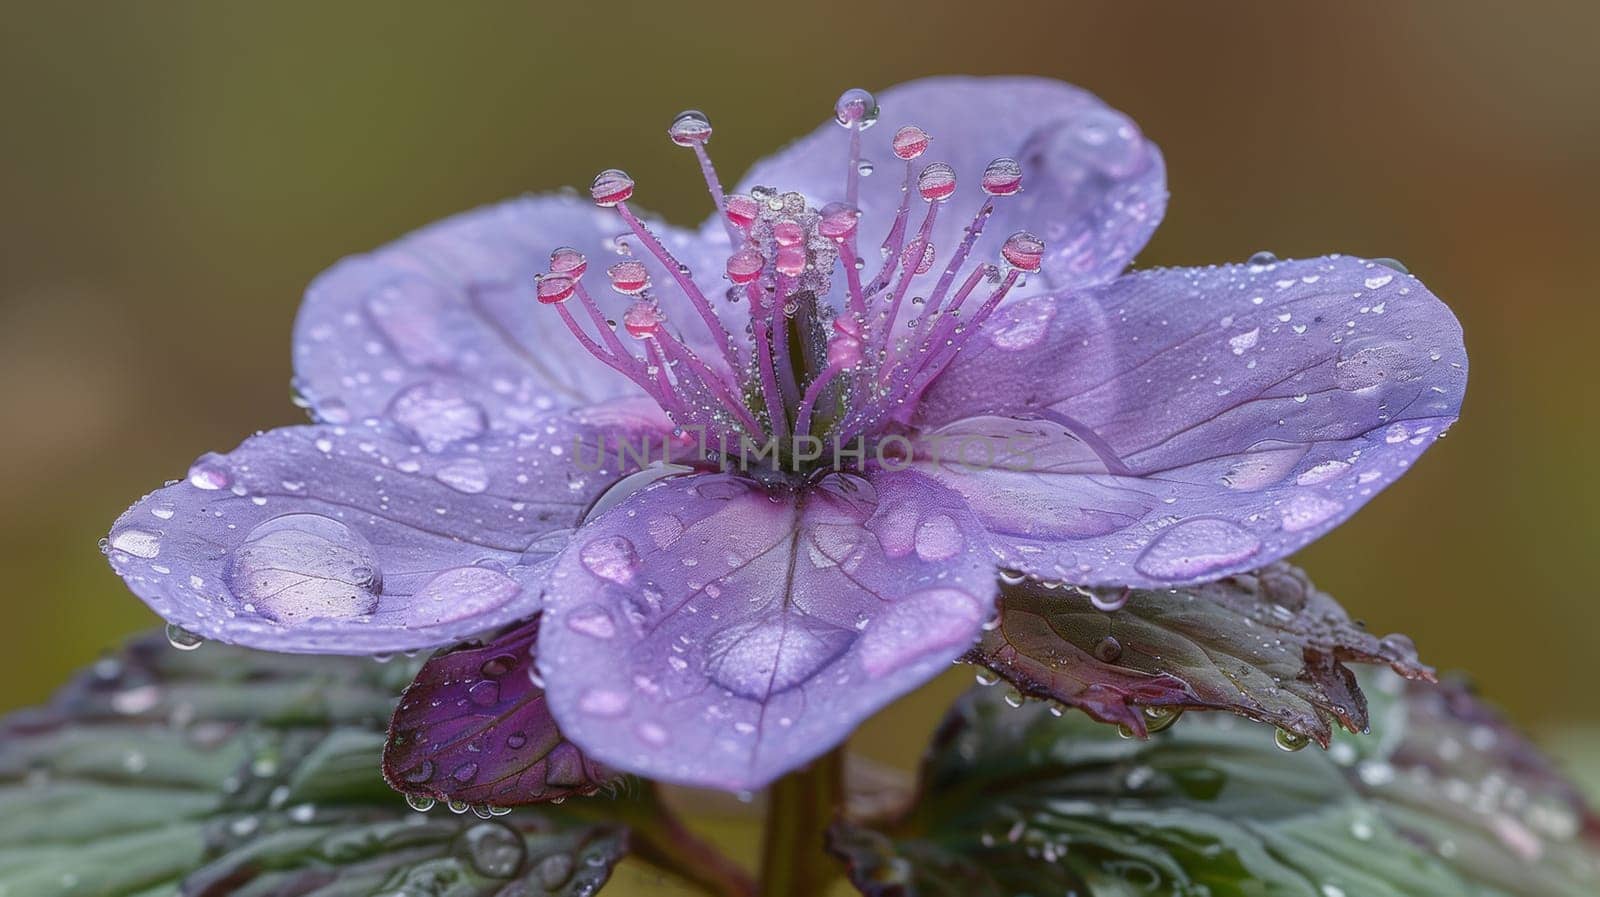 A purple flower with raindrops on it sitting in a green leafy background